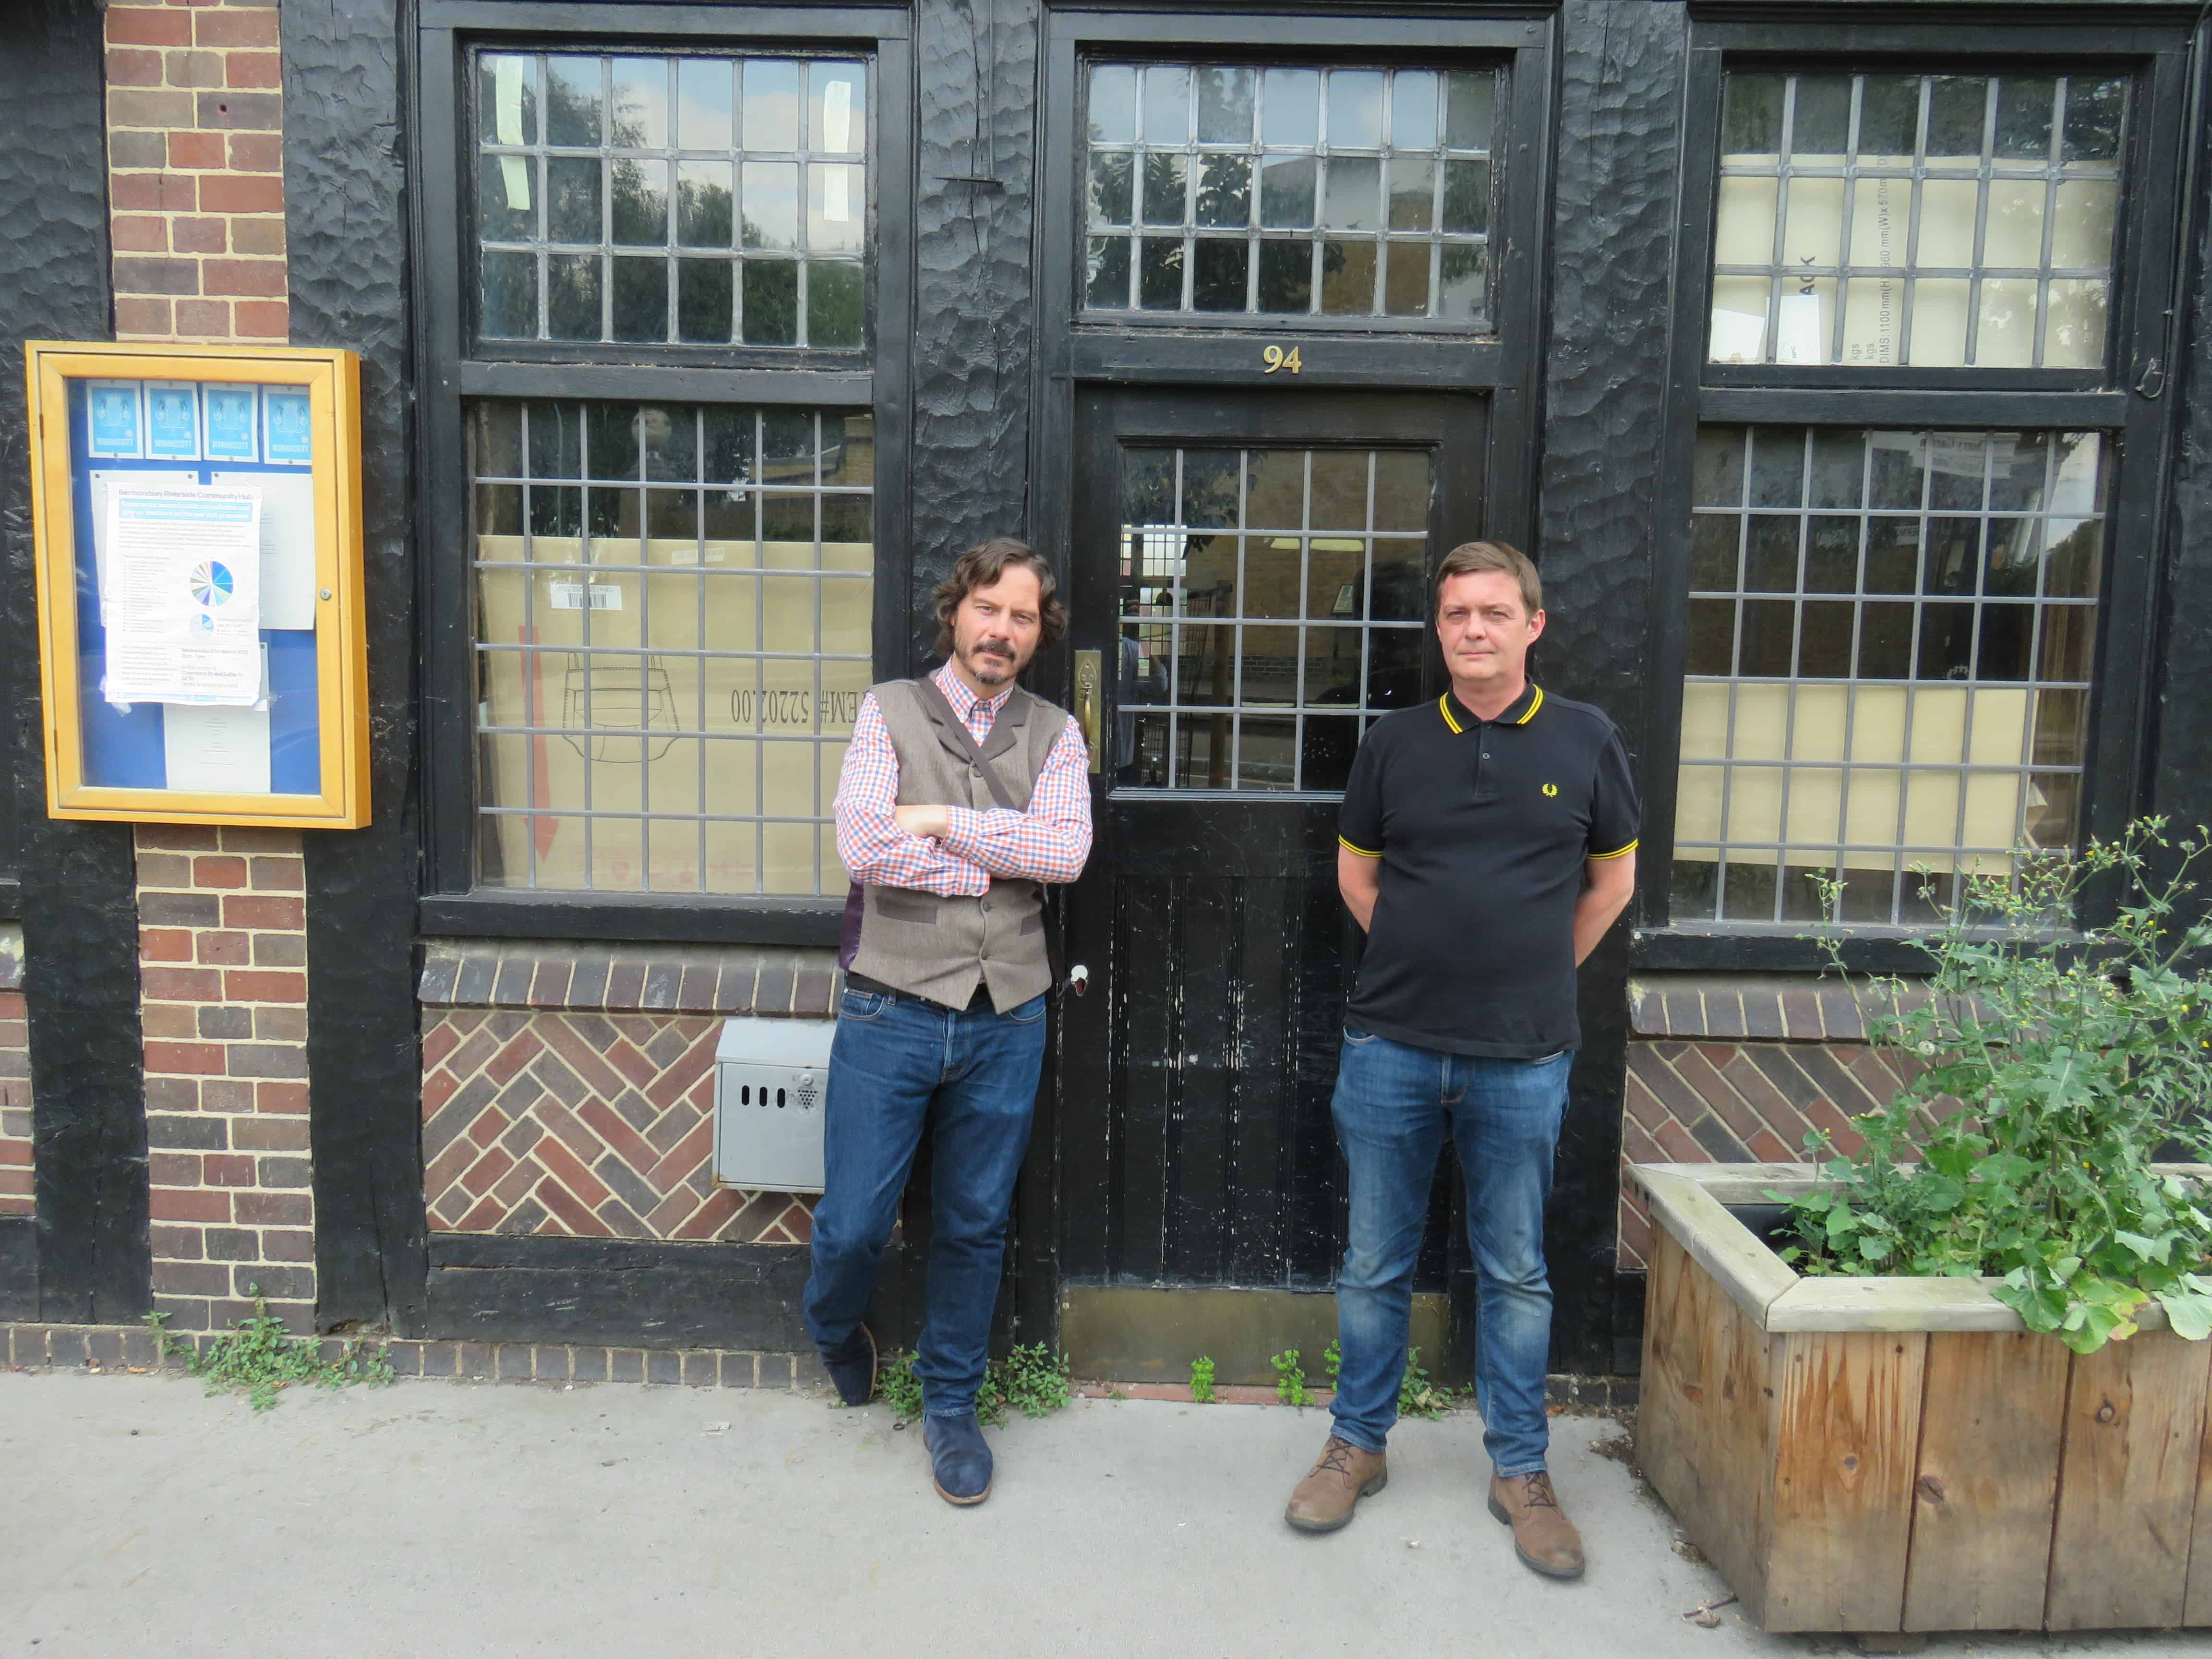 Campaigners Darren Chandler (left) and Richard O'Shea are battling the bring the iconic Berrmondsey boozer back to life